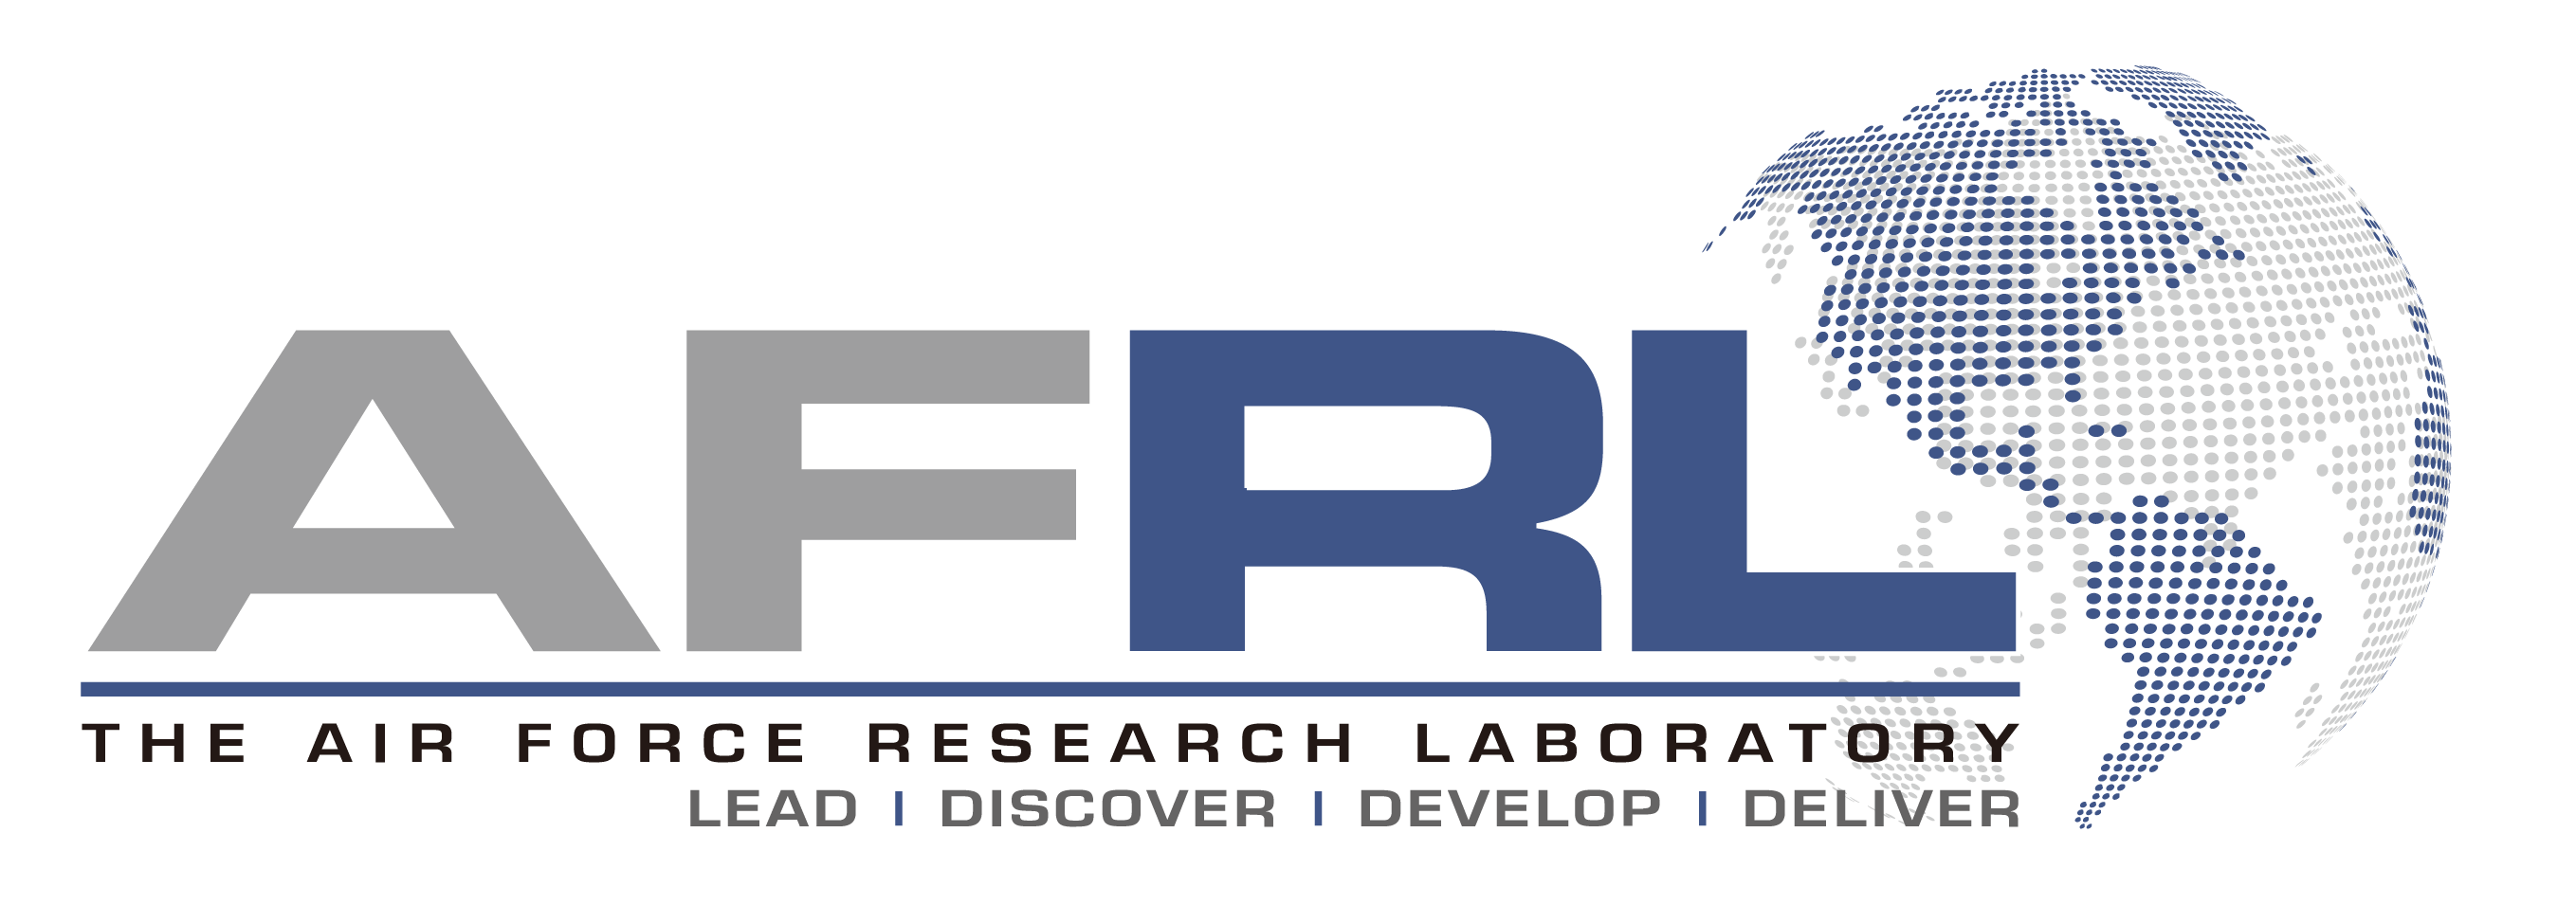 afrl-the-air-force-research-laboratory-logo-vector